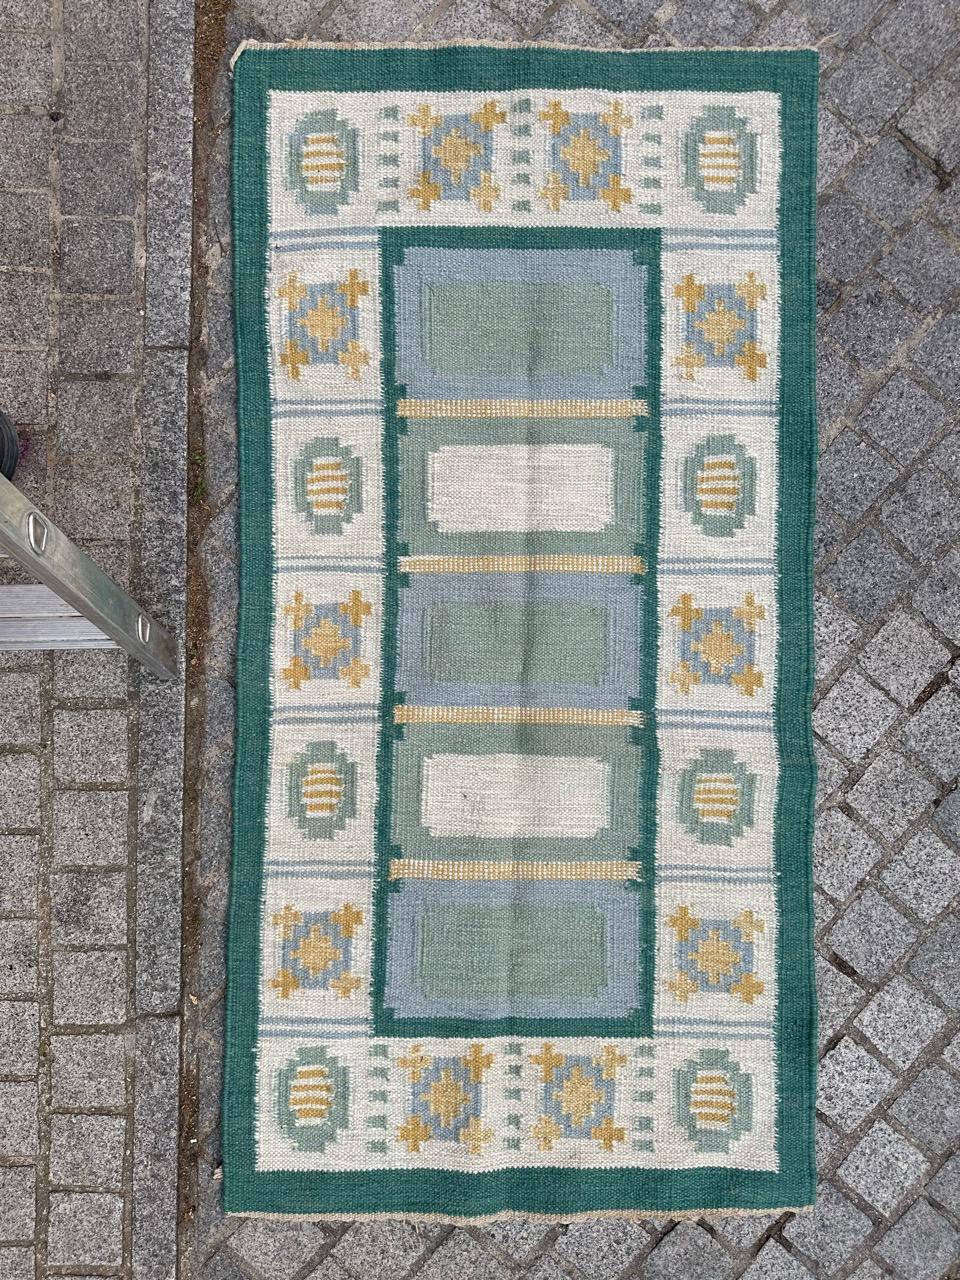 A charming vintage flat-woven Scandinavian rug featuring a stunning art deco-style geometric design in soft, light colors. This exquisite piece is entirely handwoven with wool on a cotton foundation. The field of the rug is divided into three